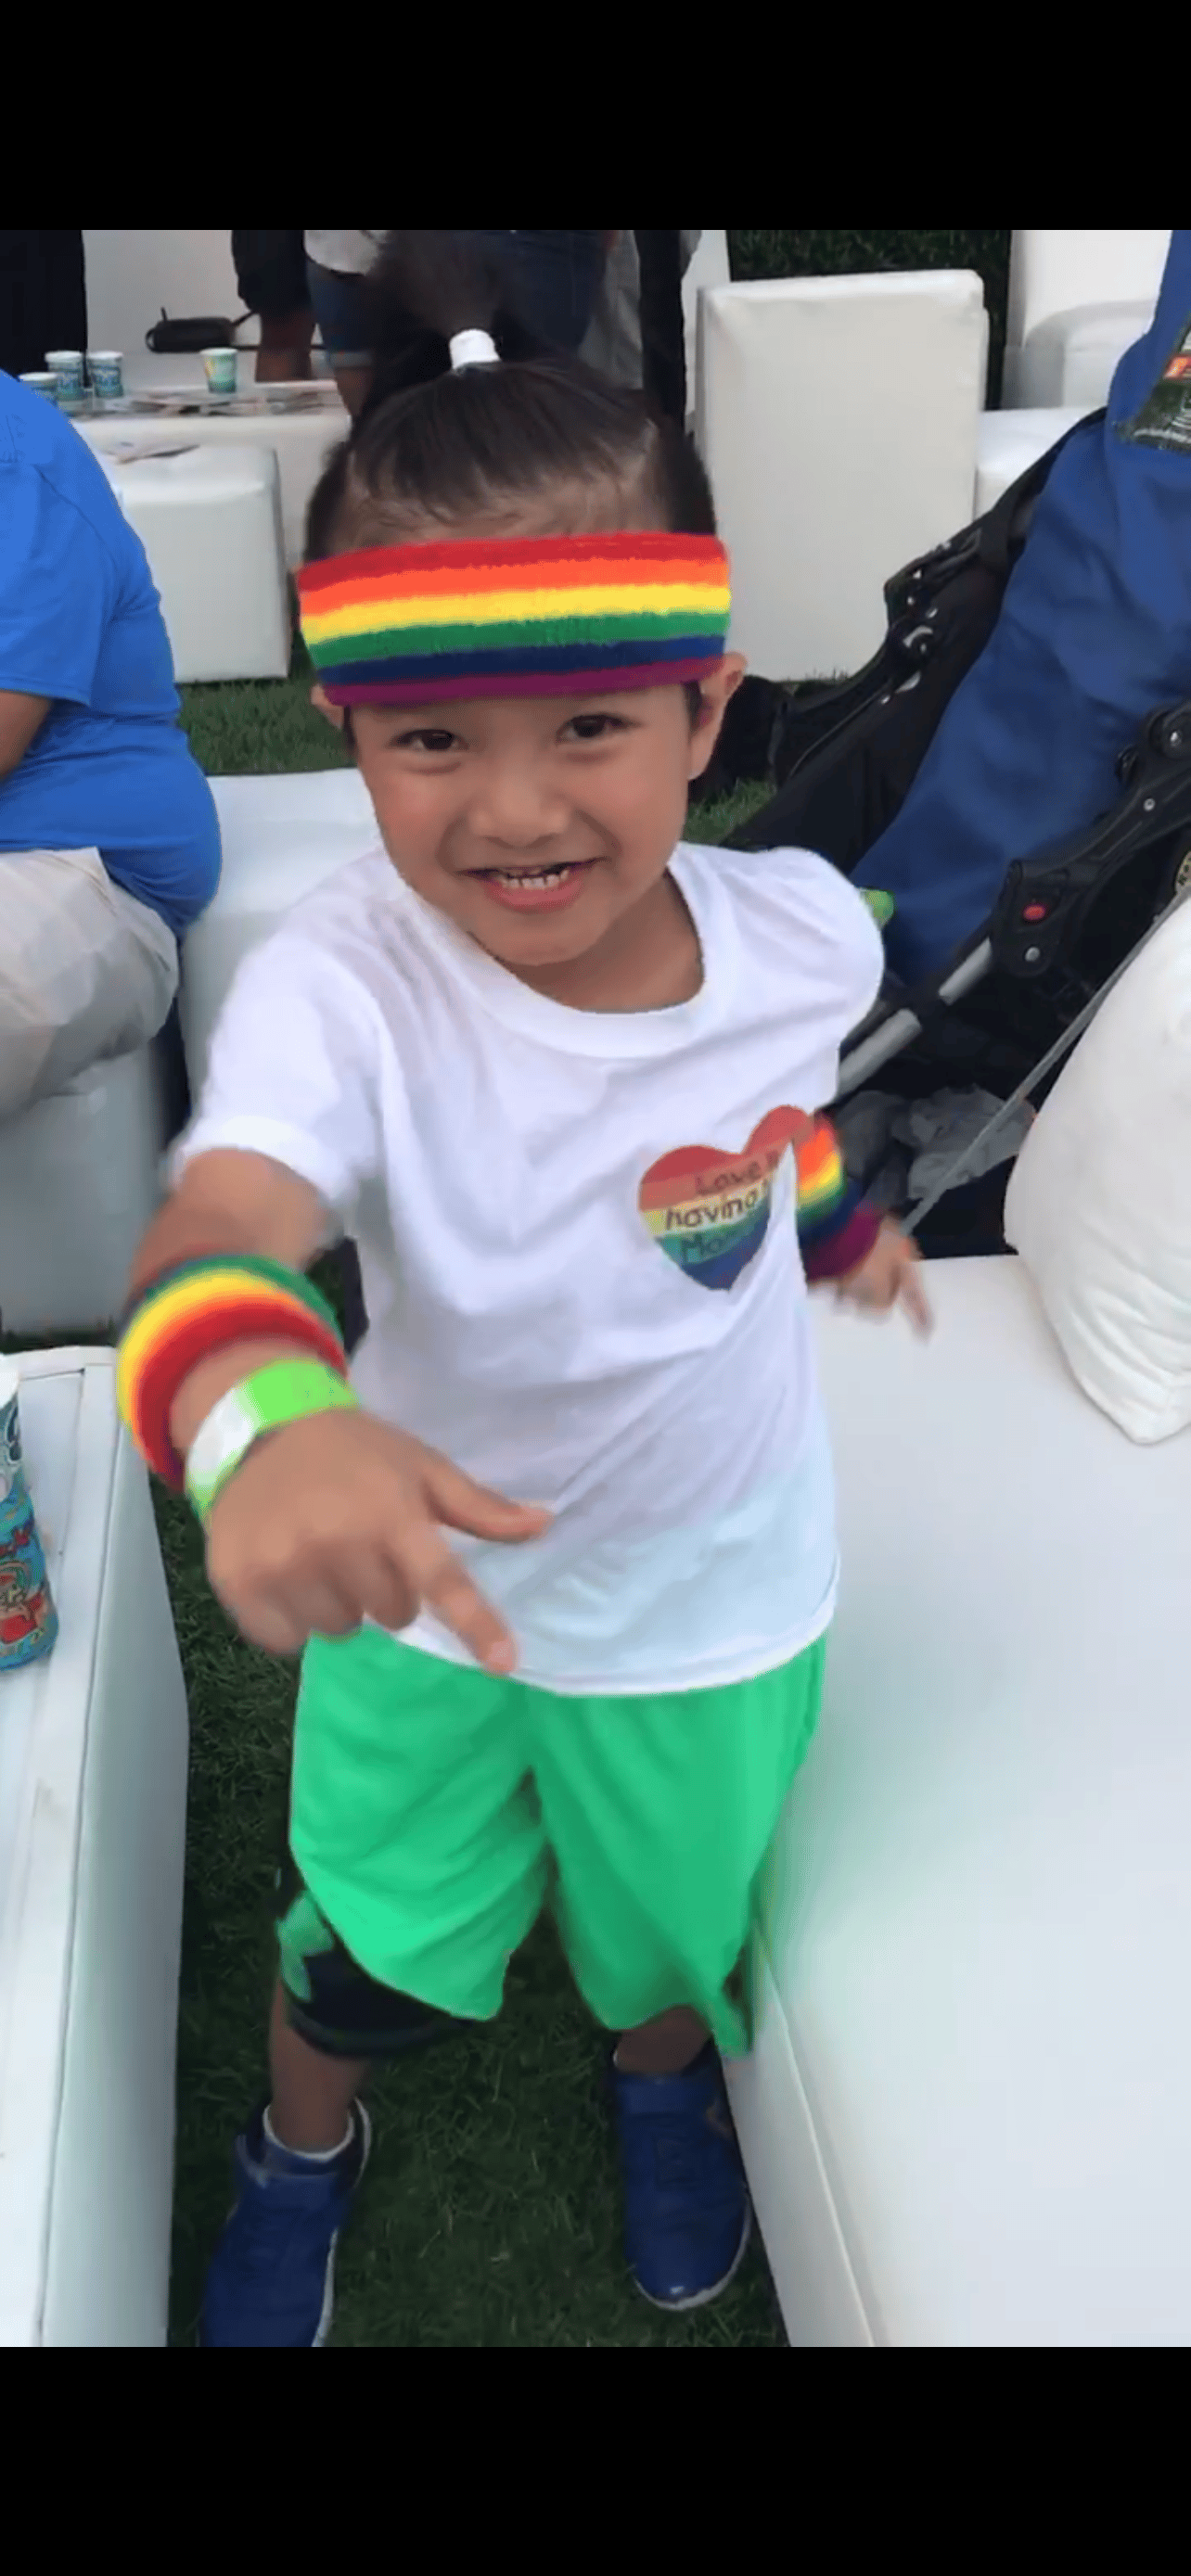 A little boy dances at Rainbow on the Green at Discovery Green